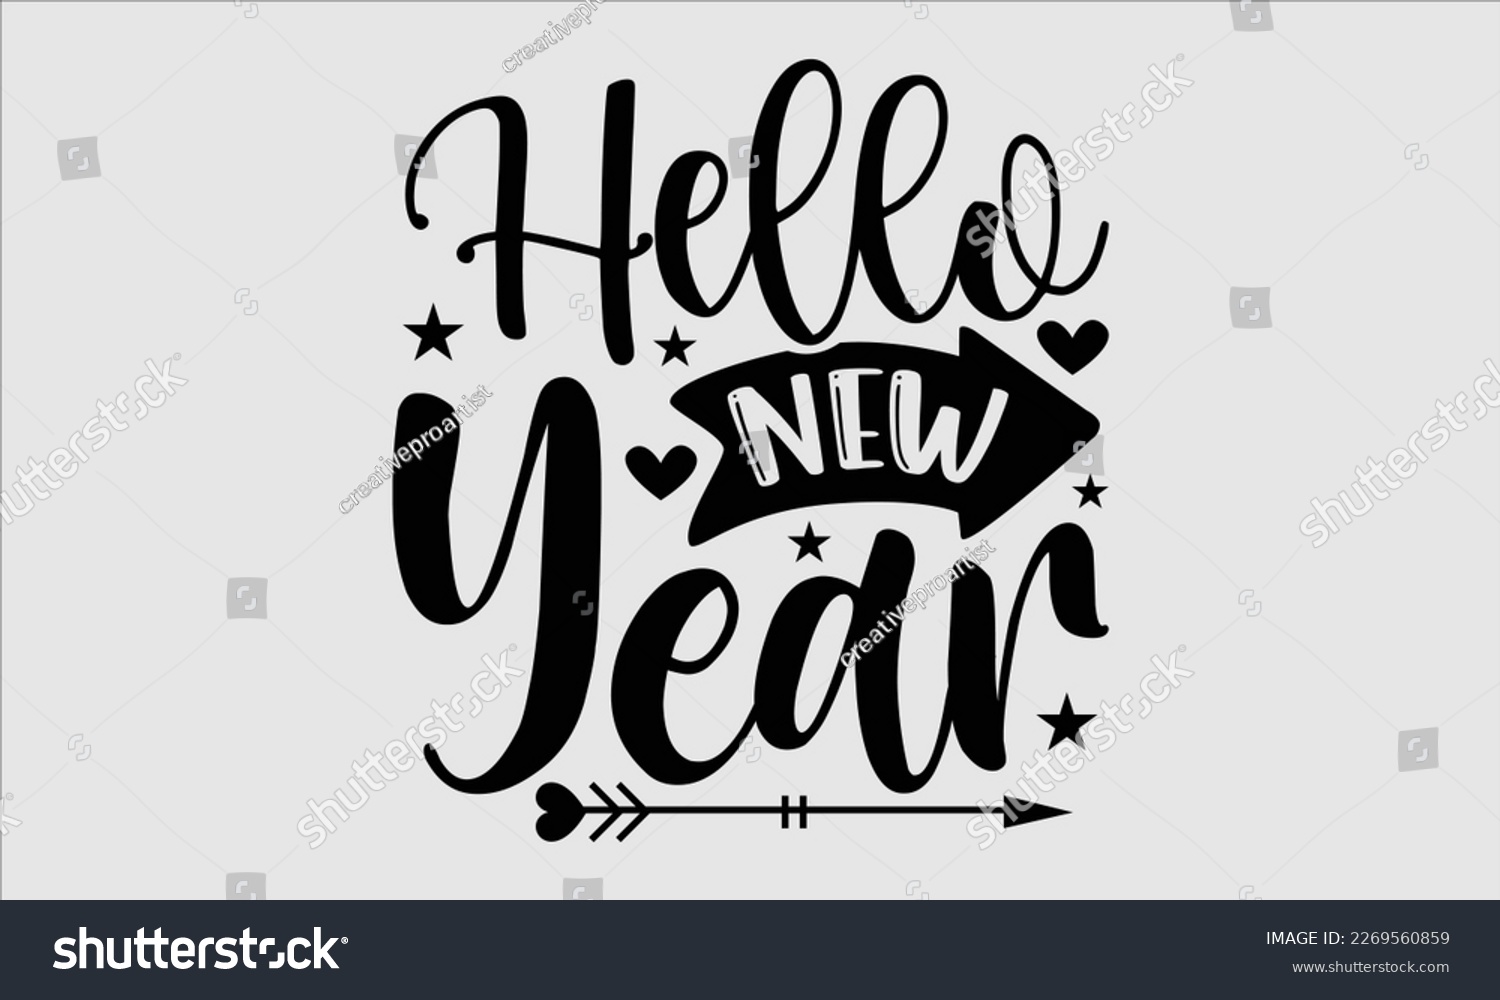 SVG of Hello New Year- Happy New Year t shirt Design, lettering vector illustration isolated on white background, gift and other printing Svg and bags, posters. eps 10 svg